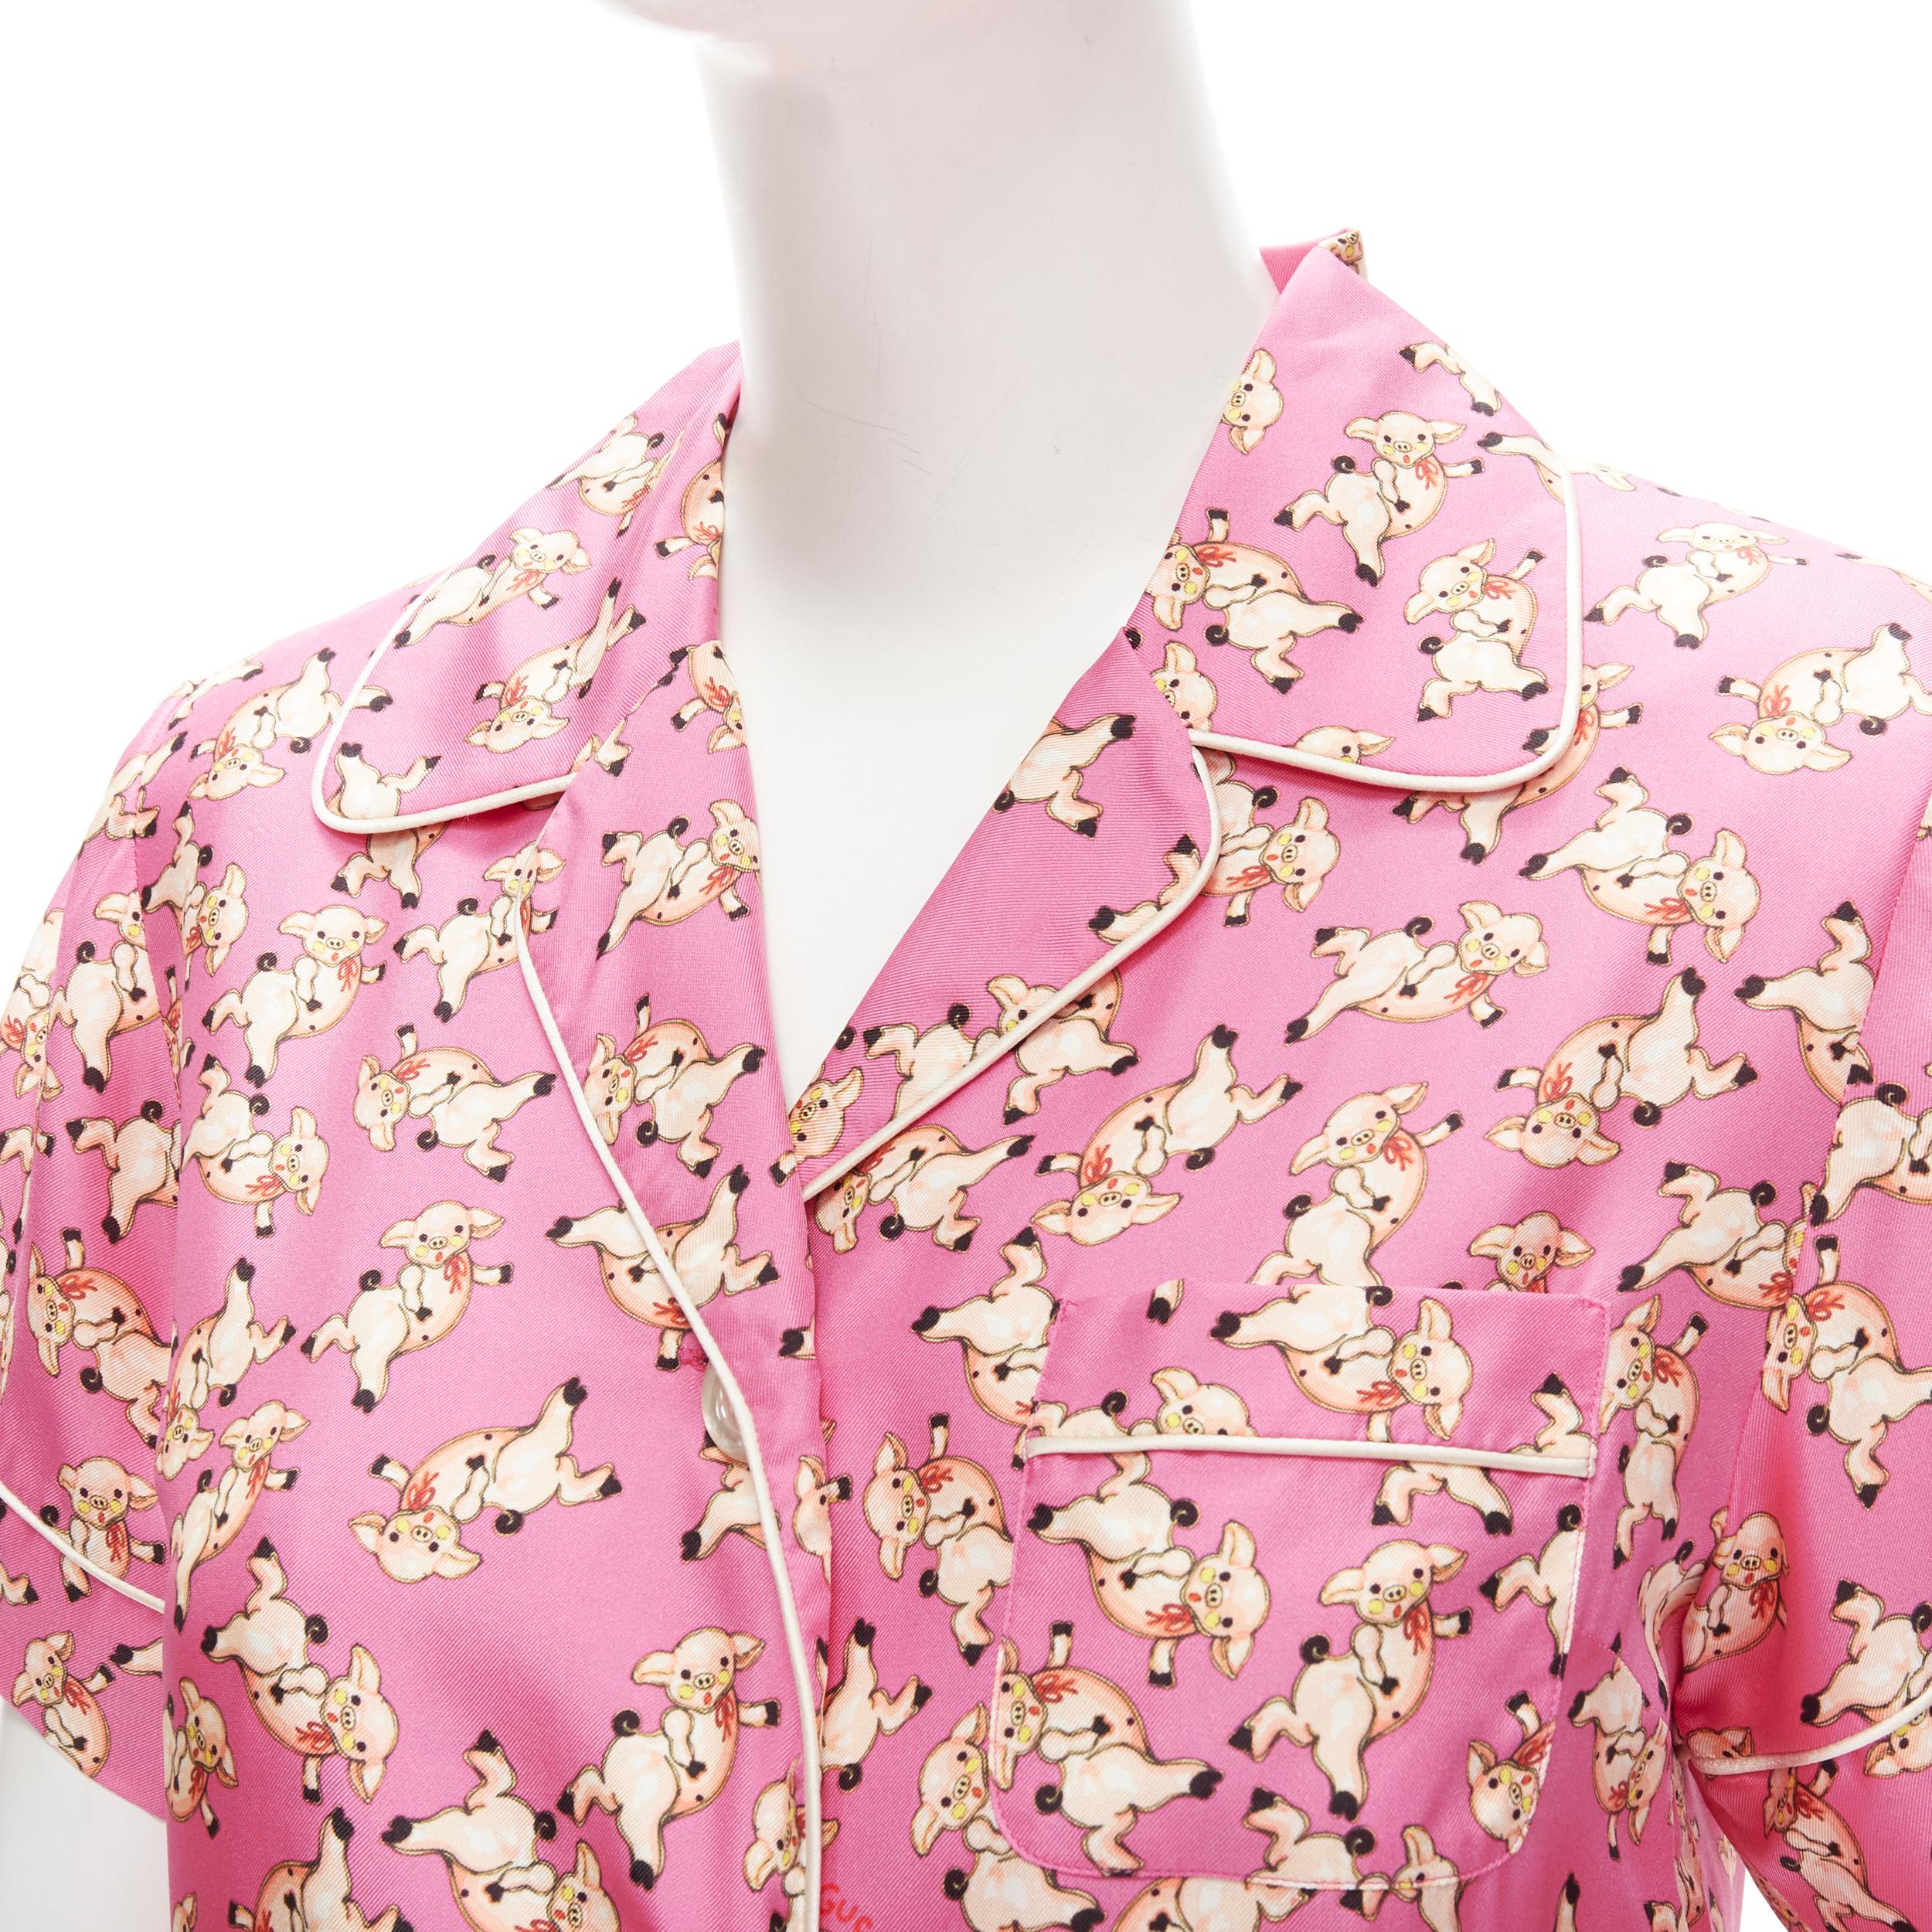 new GUCCI CNY 2019 100% silk pink piggy print cropped pajama shirt IT36 XS rare 
Reference: ANWU/A00467 
Brand: Gucci 
Collection: 2019 Year Of Pig Limited Collection 
Material: Silk 
Color: Pink 
Pattern: Pig 
Closure: Button 
Extra Detail: Lightly